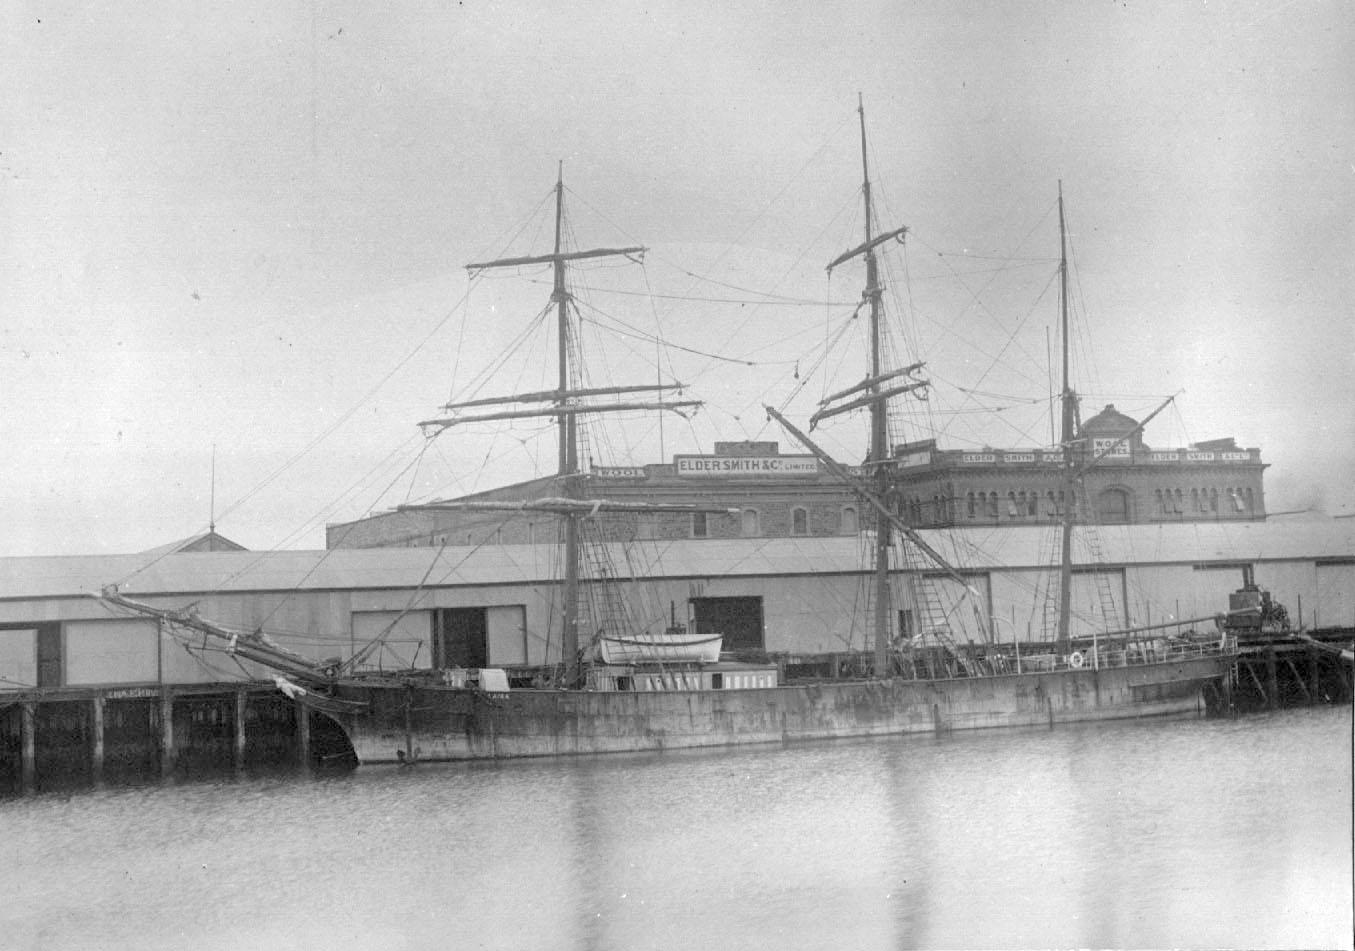 Iron Barque, "Laira", built in 1870 at Sunderland.  She was first registered in Plymouth and seems to have arrived in Australasia when her registration was transferred to Auckland in 1882.  On 2 April 1898 when she was owned in Dunedin, she was in a colli